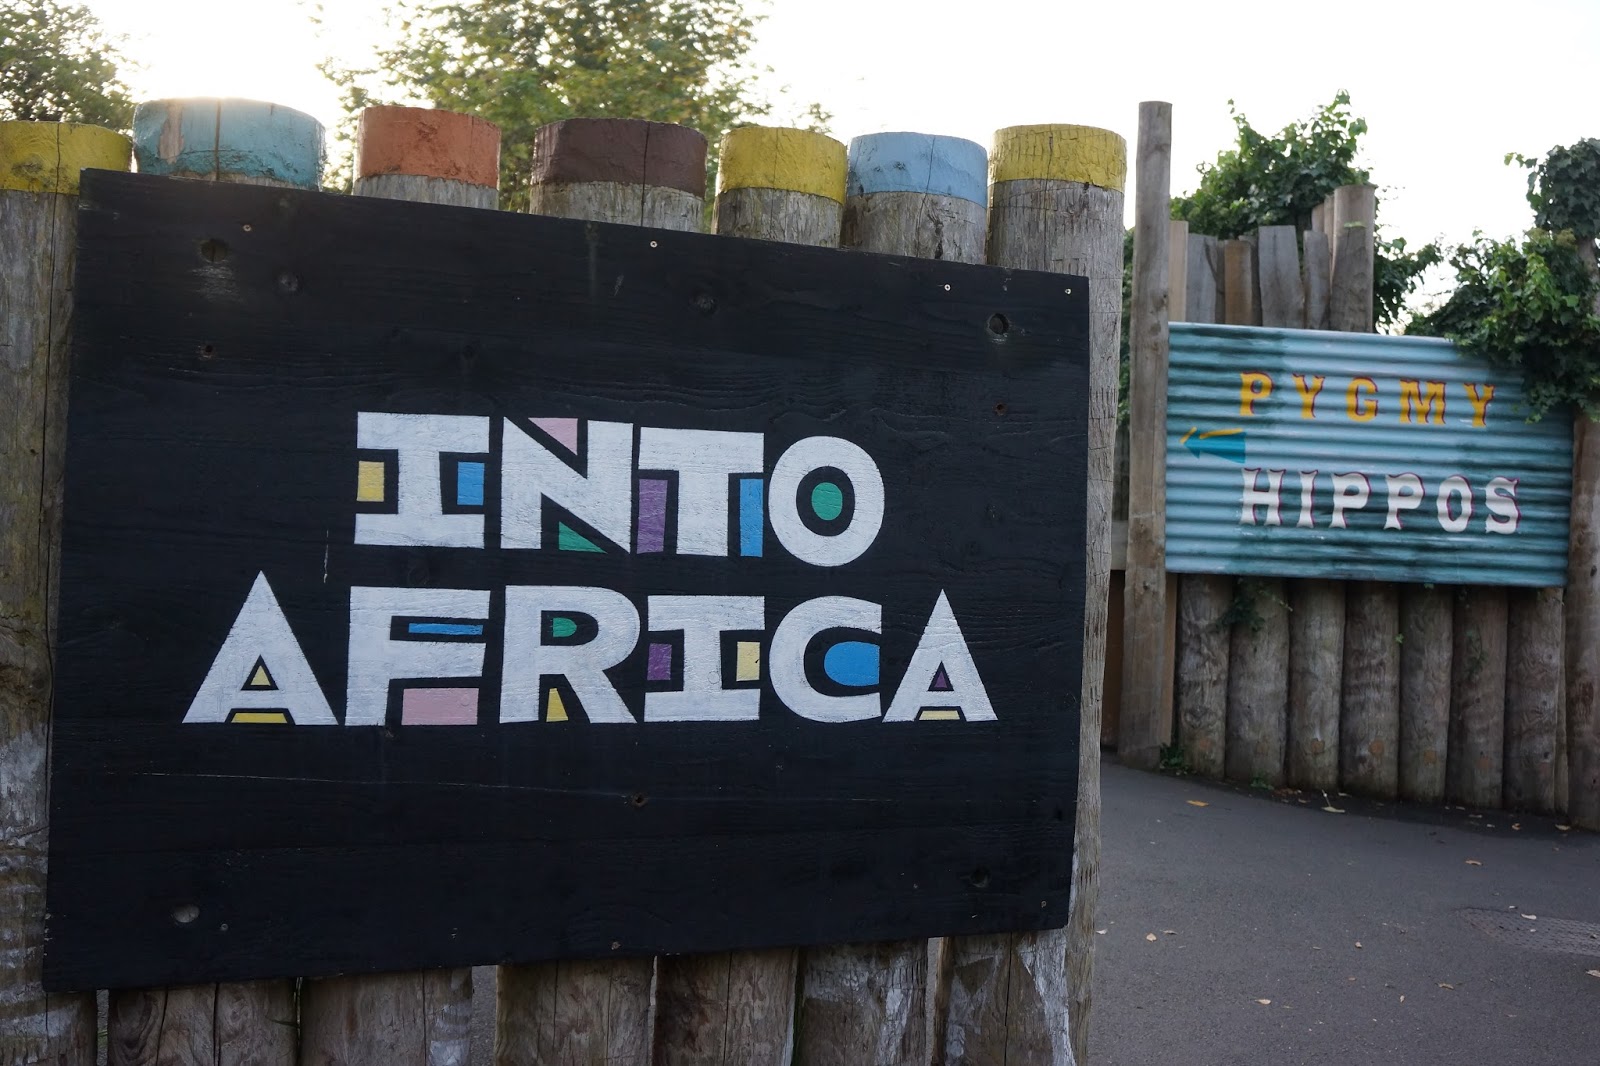 szl london zoo with toddlers into africa signs